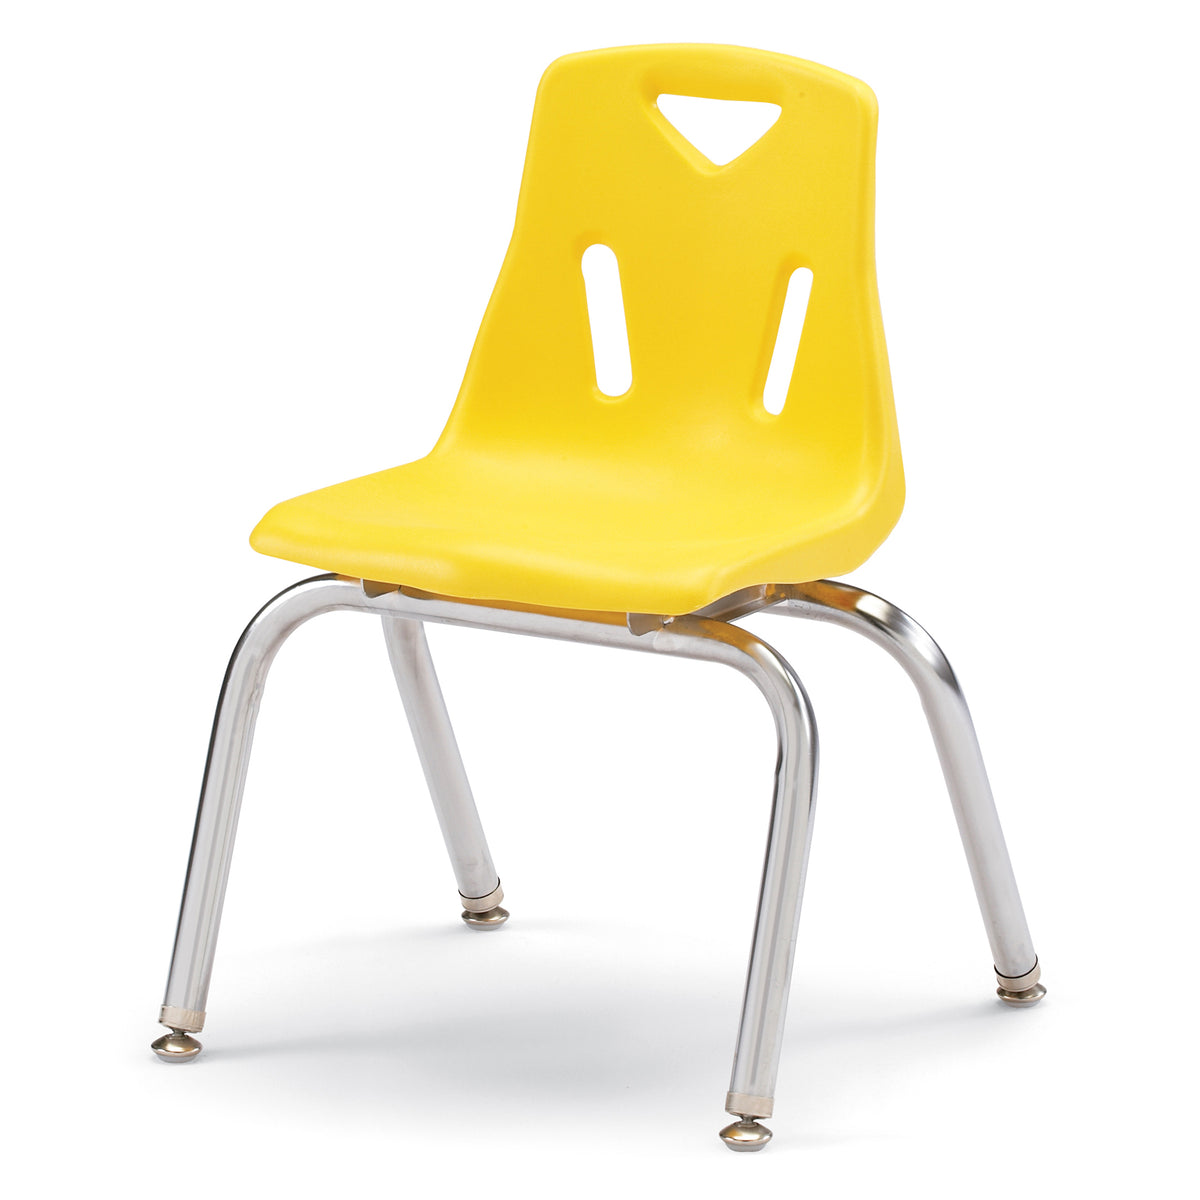 8144JC6007, Berries Stacking Chairs with Chrome-Plated Legs - 14" Ht - Set of 6 - Yellow